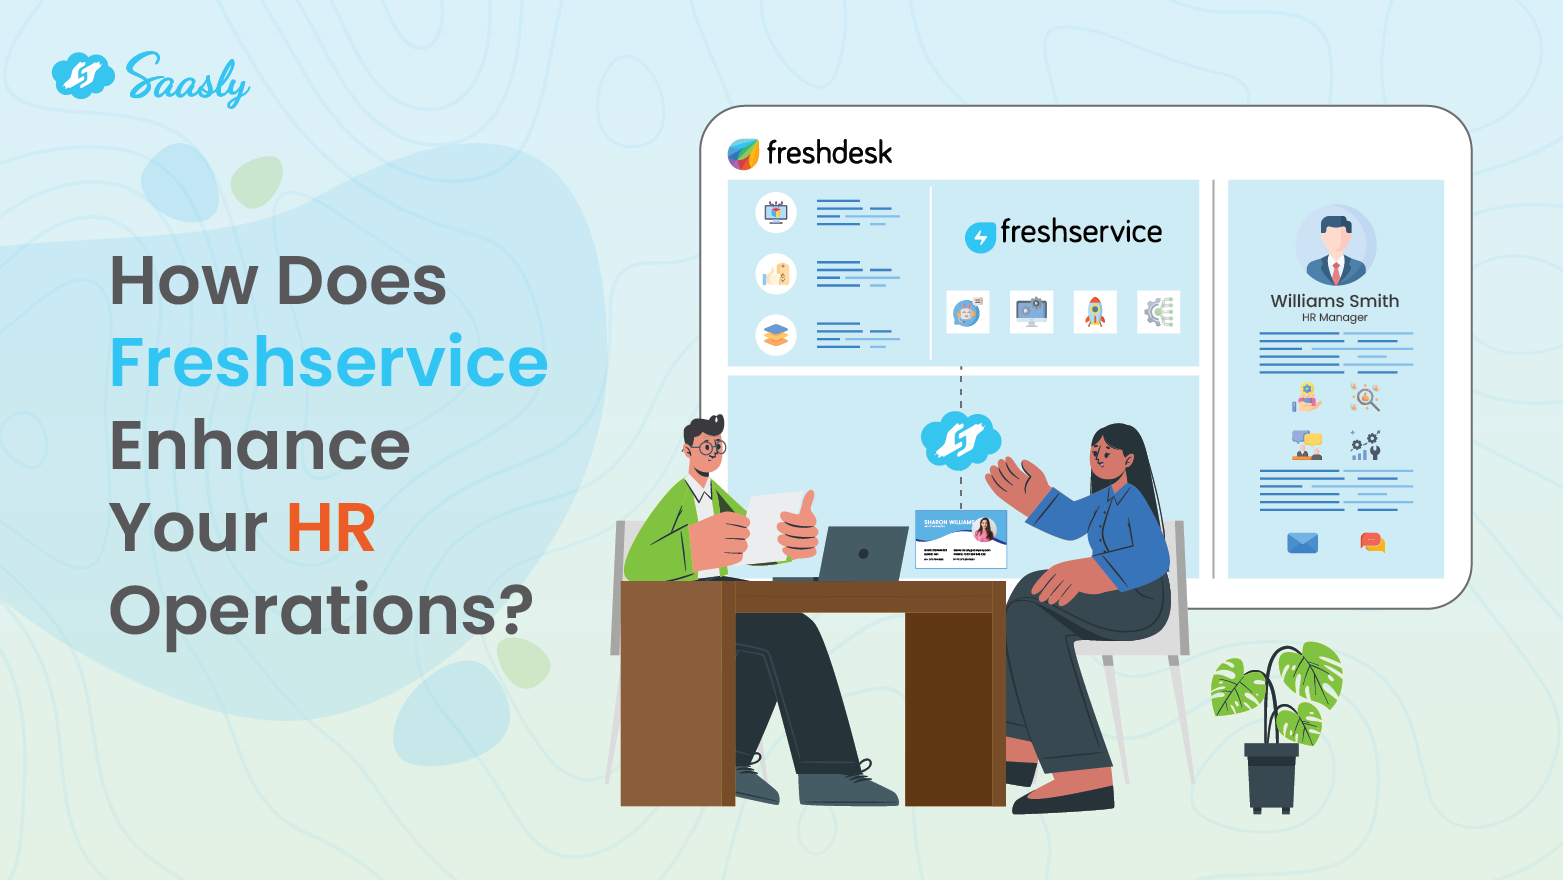 How Does Freshservice Enhance Your HR Operations?